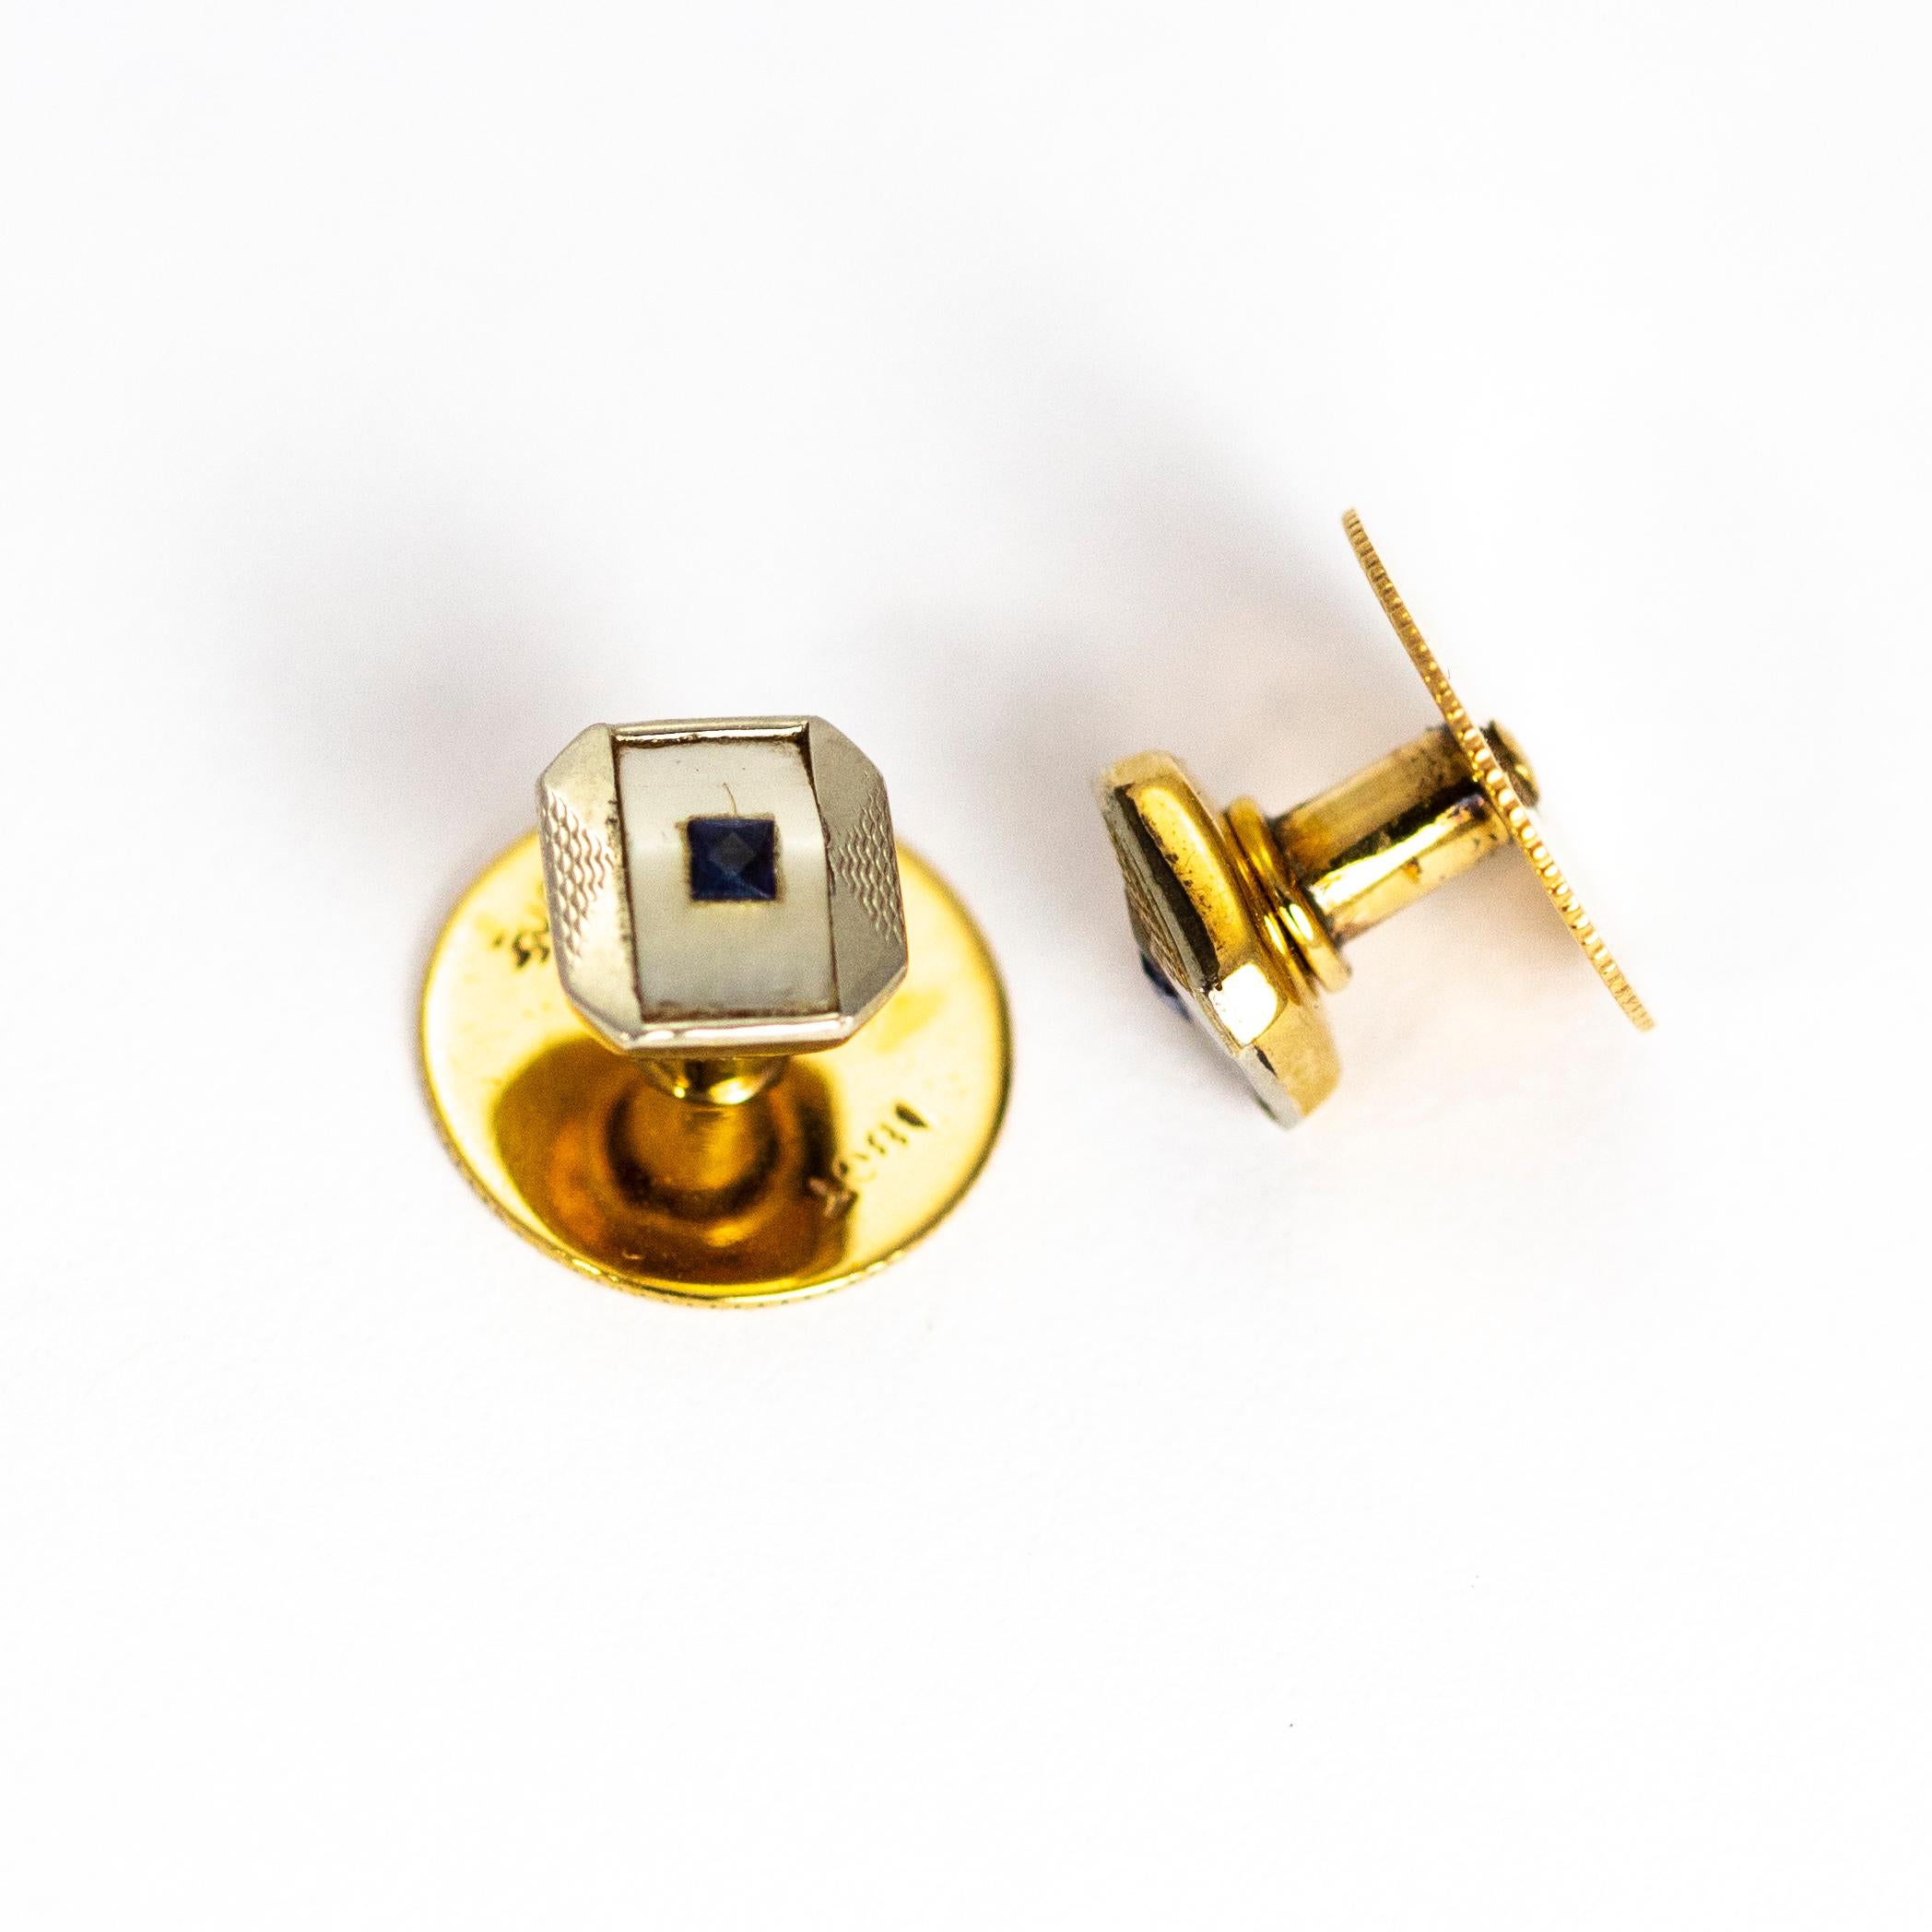 This stunning Edwardian cuff link and stud set come complete in their original fitted box. Each link or stud feature a mother of pearl panel with either a square cut diamond or sapphire at the centre. These are modelled out of 9ct and 18ct Gold and